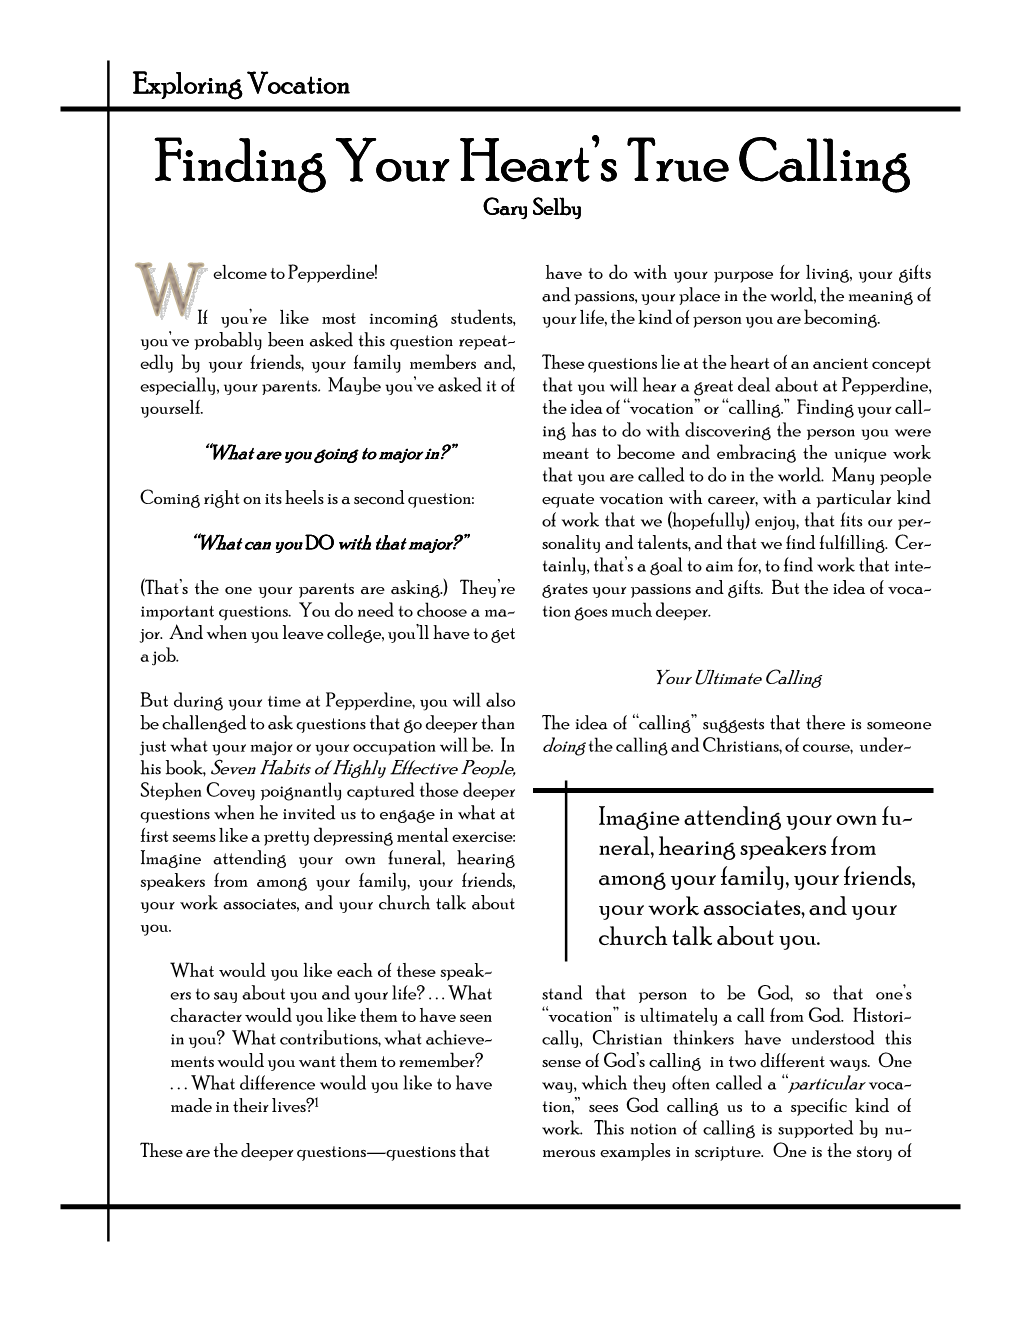 Finding Your Heart's True Calling